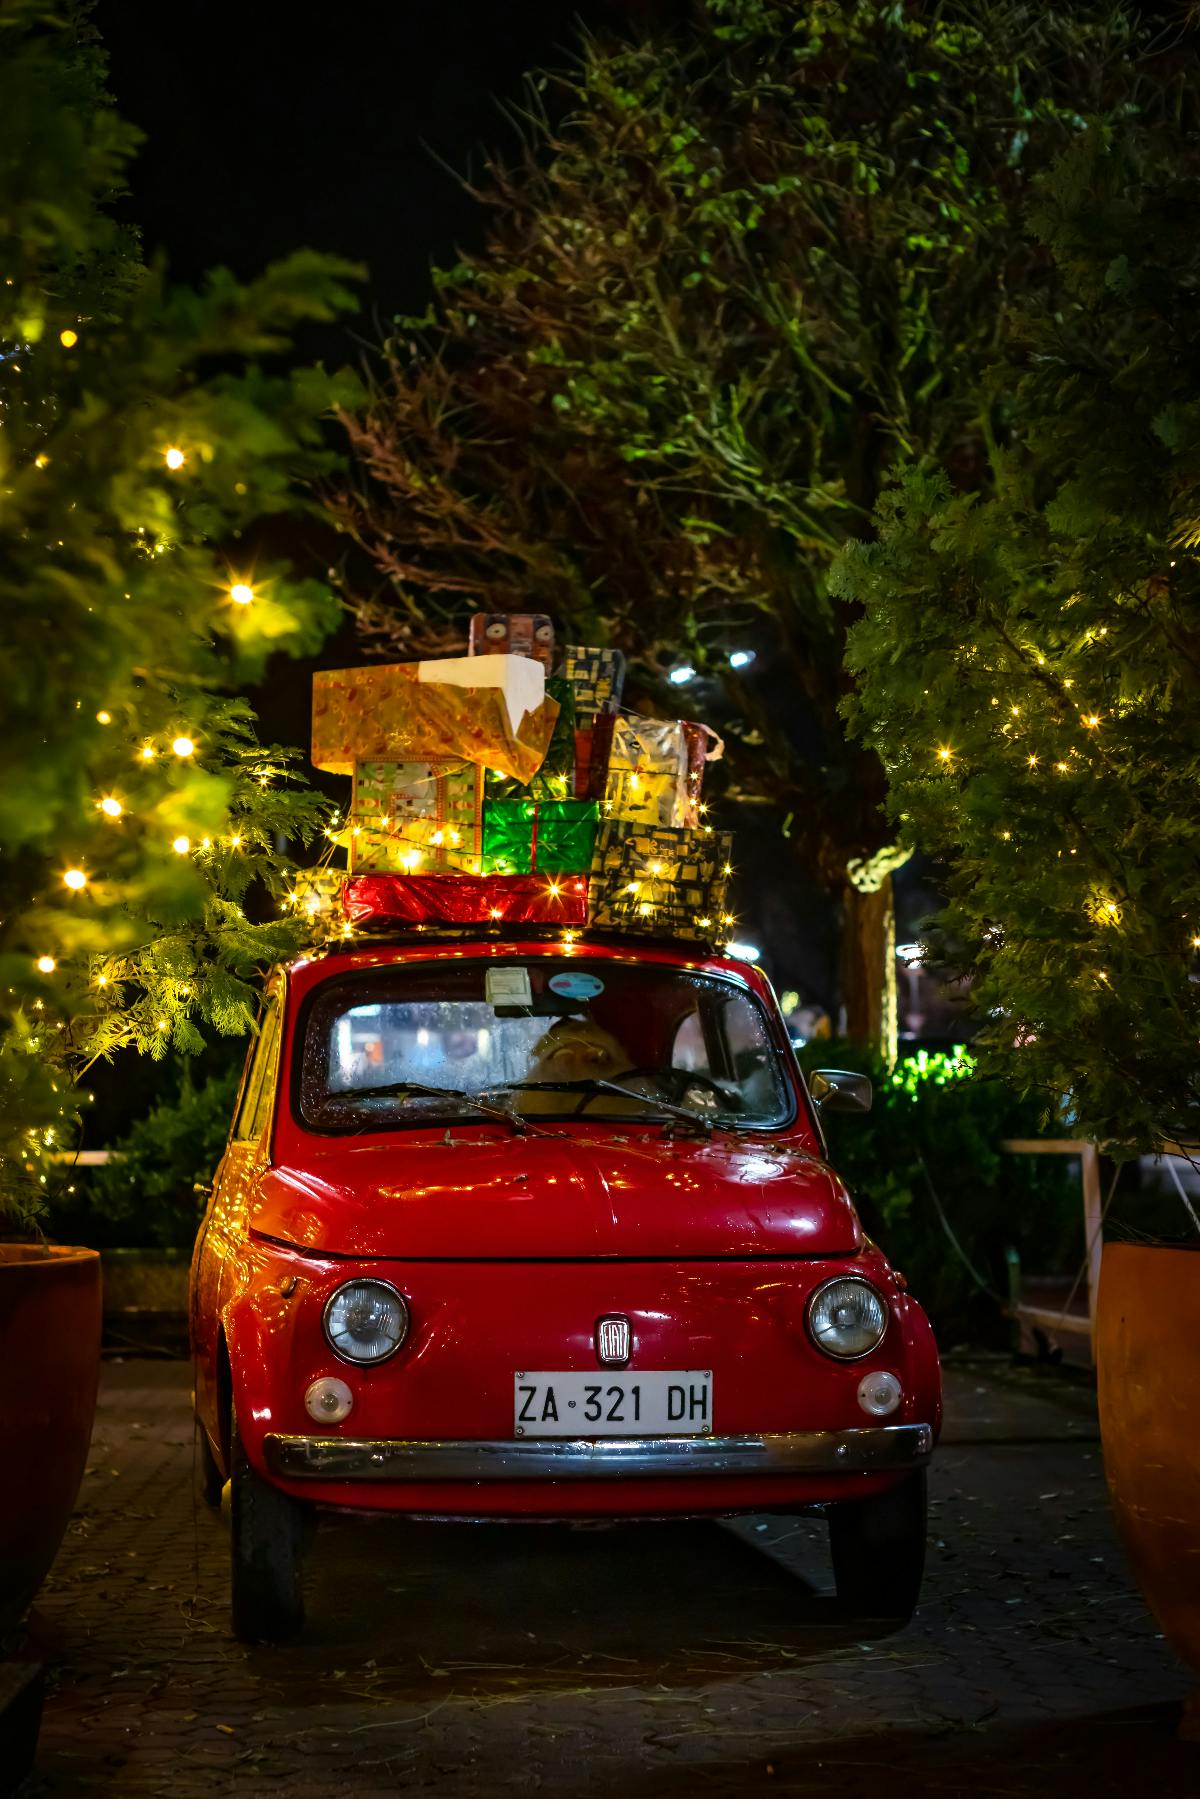 A red Fiat loaded up with brightly wrapped Christmas gifts.